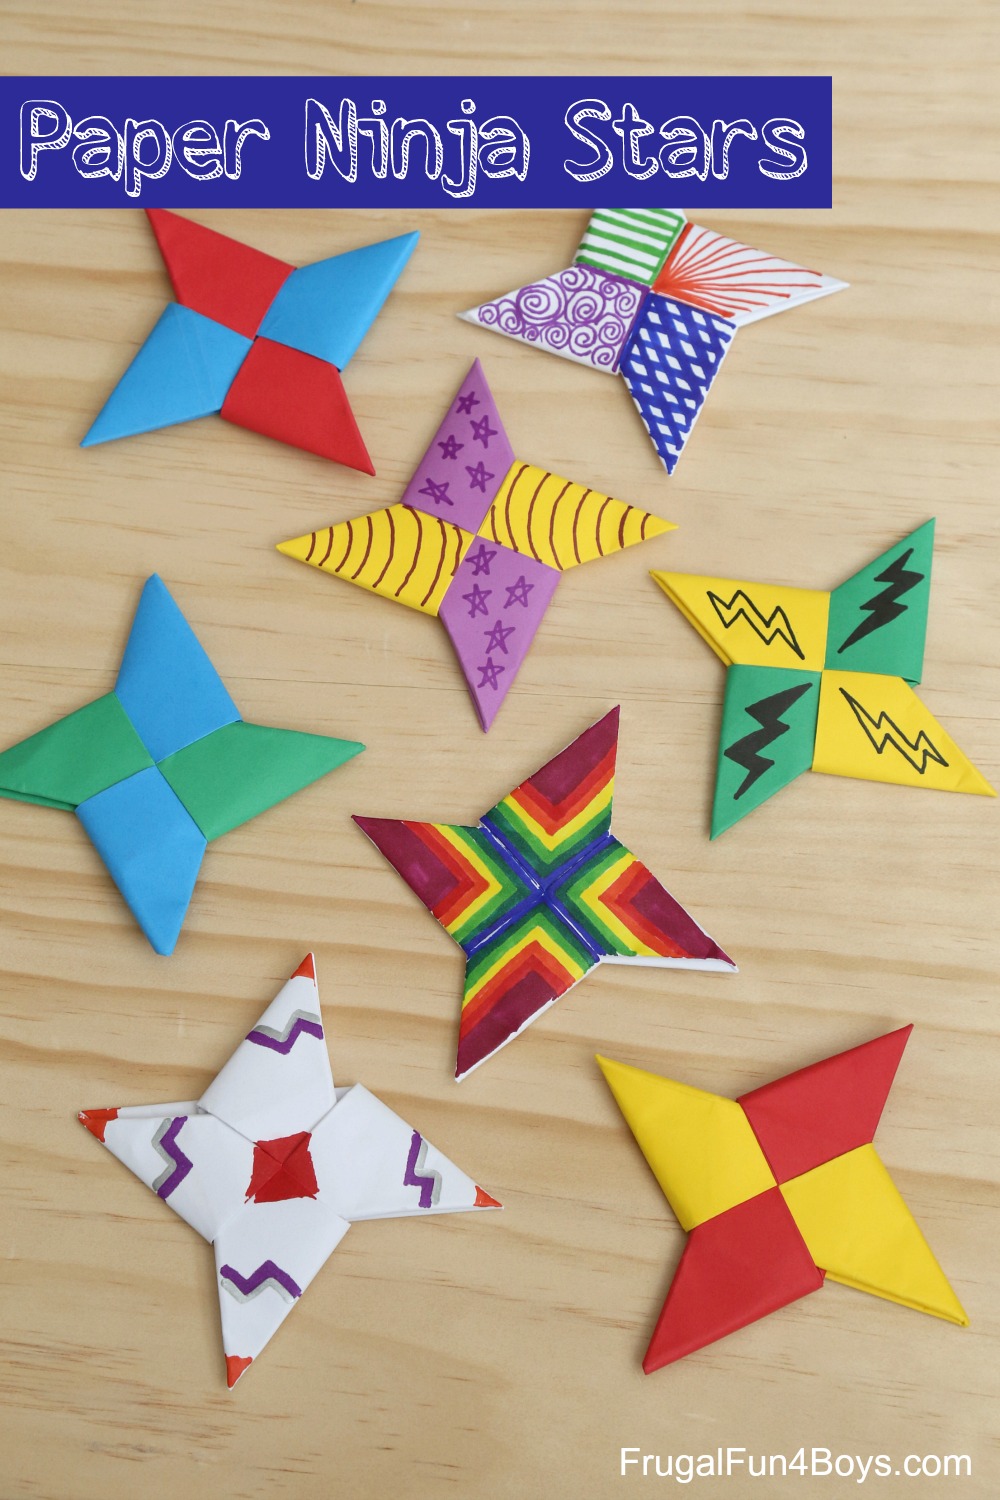 How to Fold Paper Ninja Stars - Frugal Fun For Boys and Girls